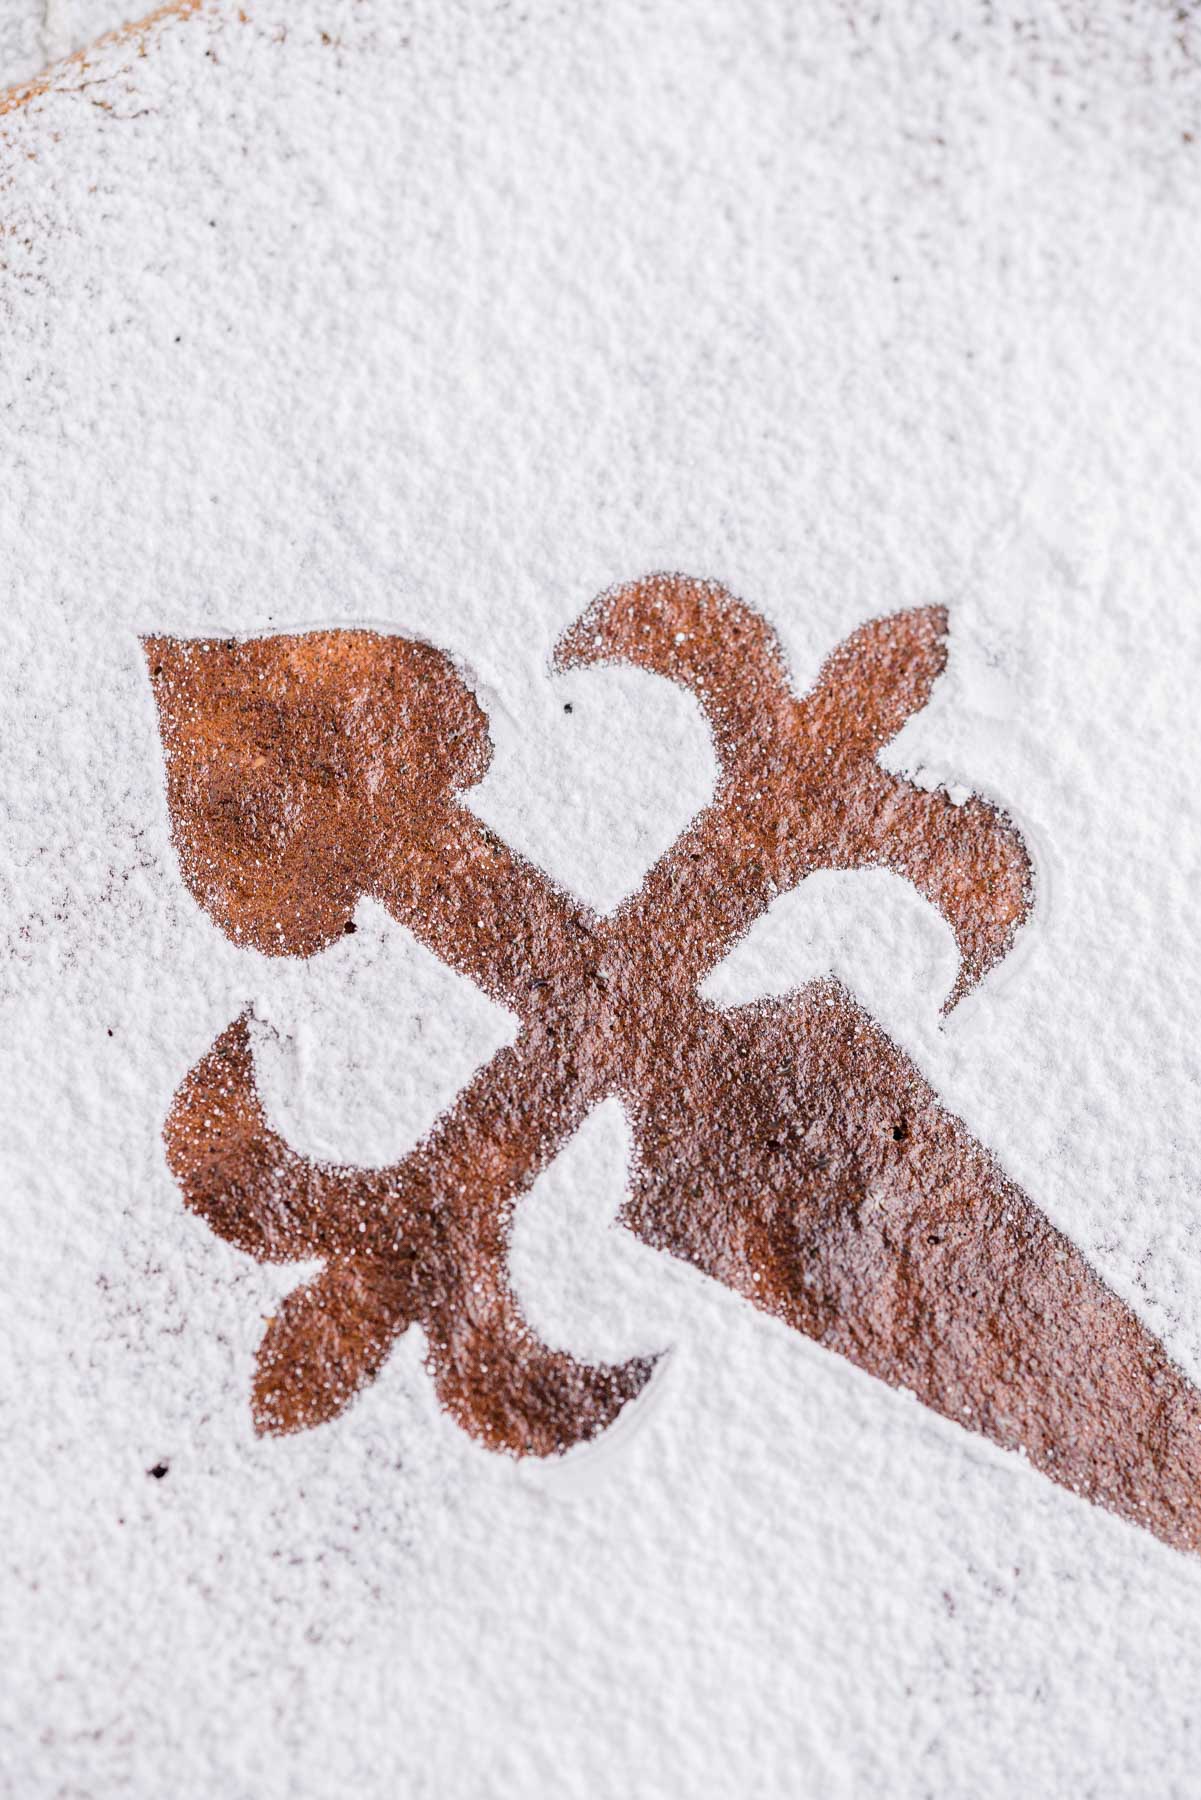 santiago cross shape on top of cake covered in powdered sugar.